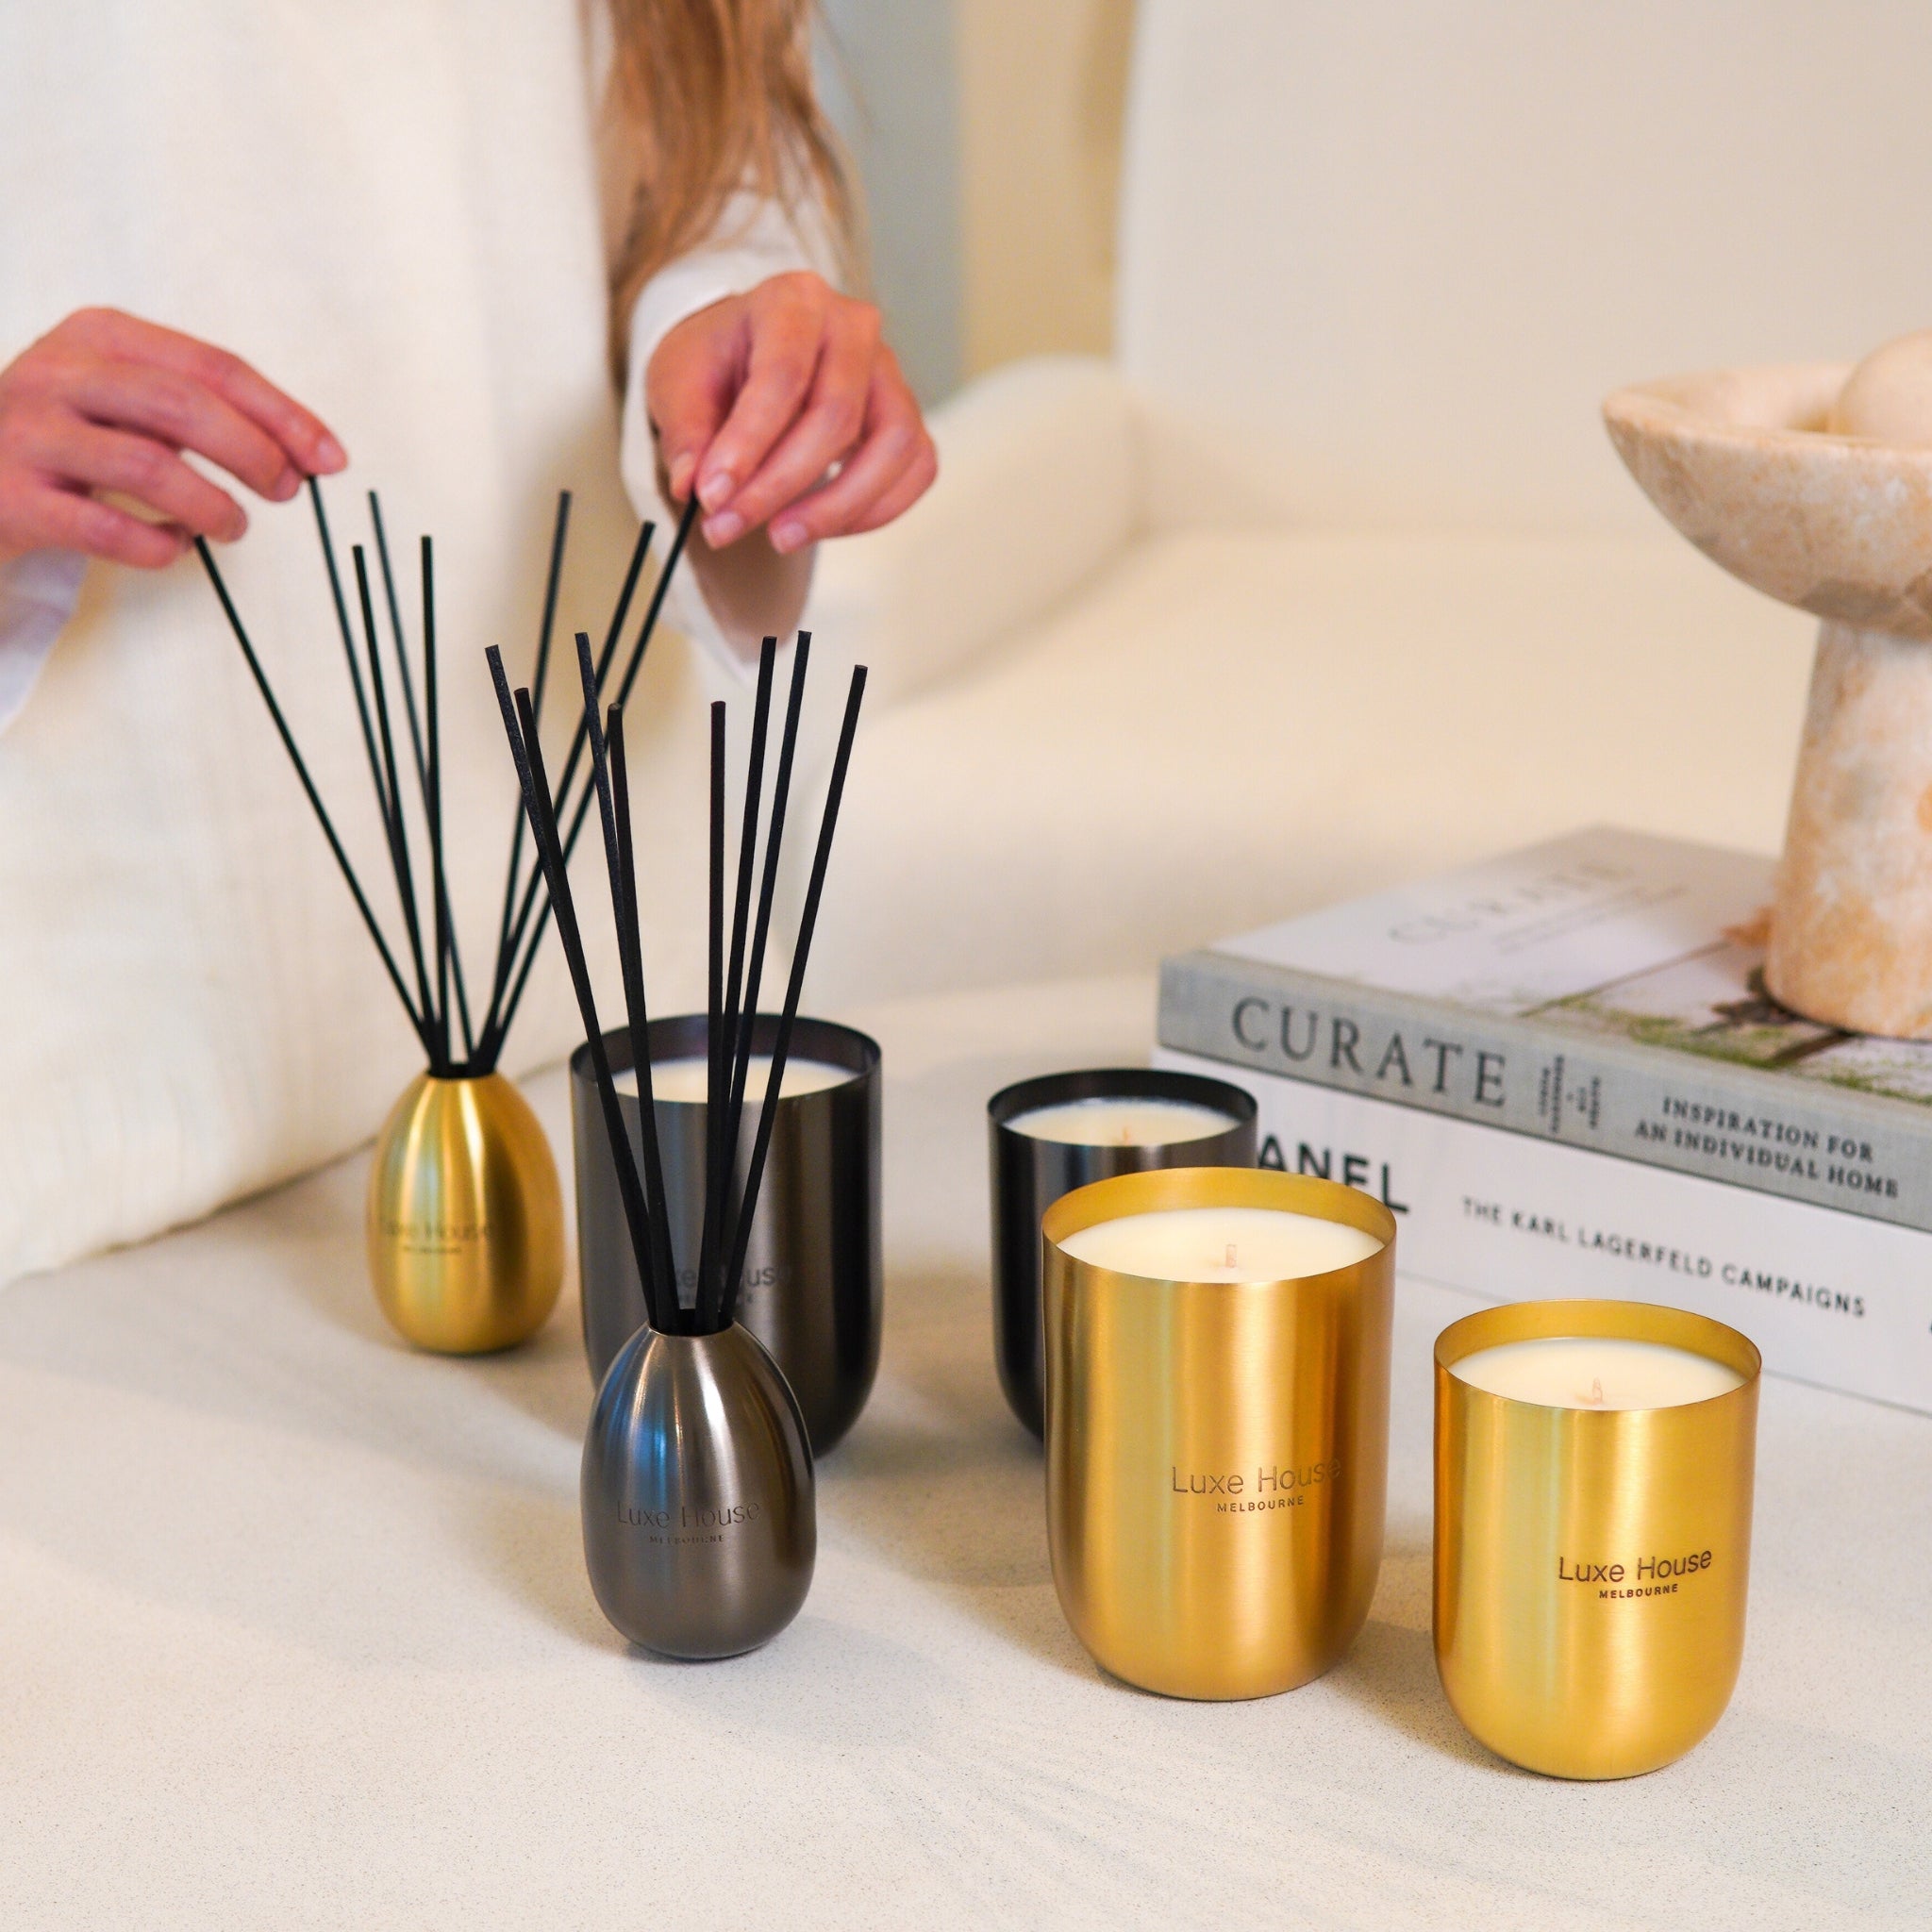 Kyoto Woods Luxury Reed Diffuser